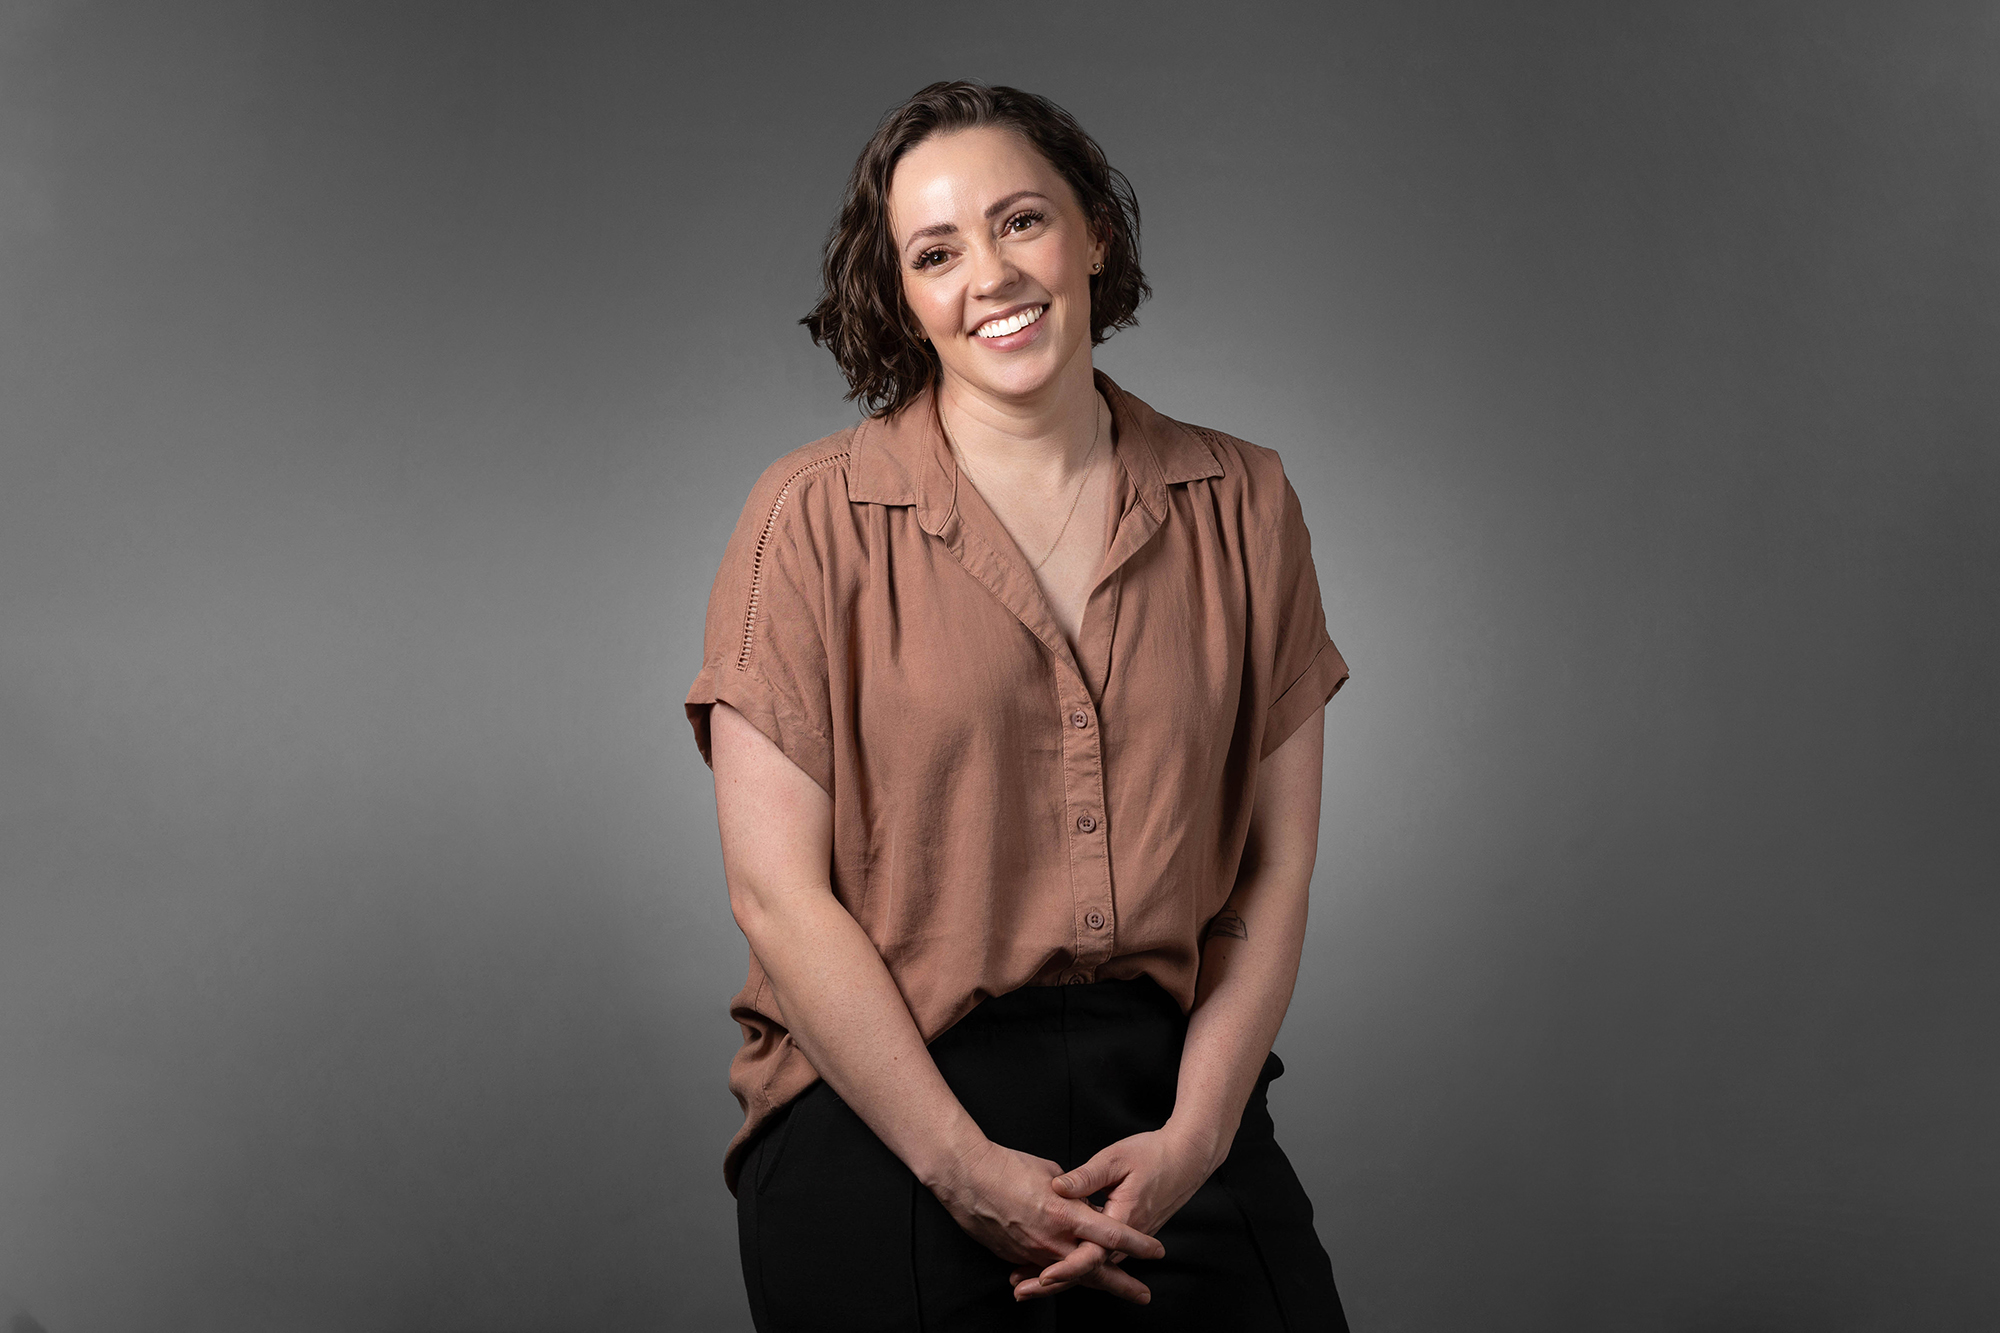 A smiling woman in a brown shirt and black pants poses for corporate headshots.